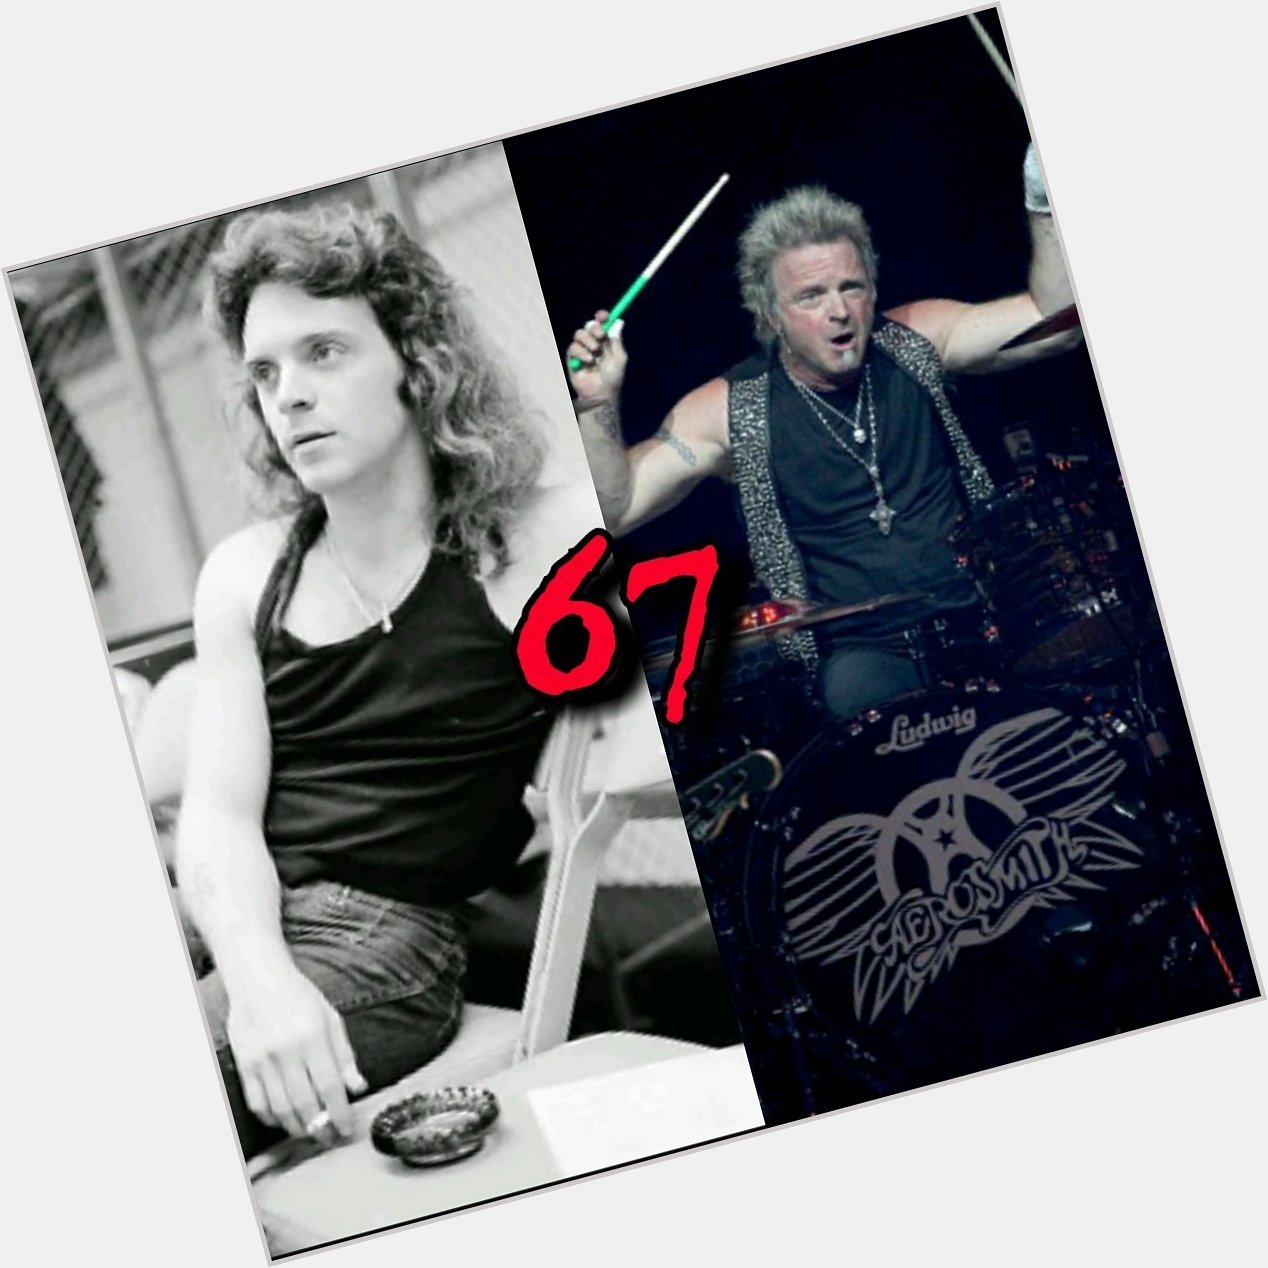  Happy 67th Birthday to the most kick-ass drummer out there - Joey Kramer of Aerosmith 